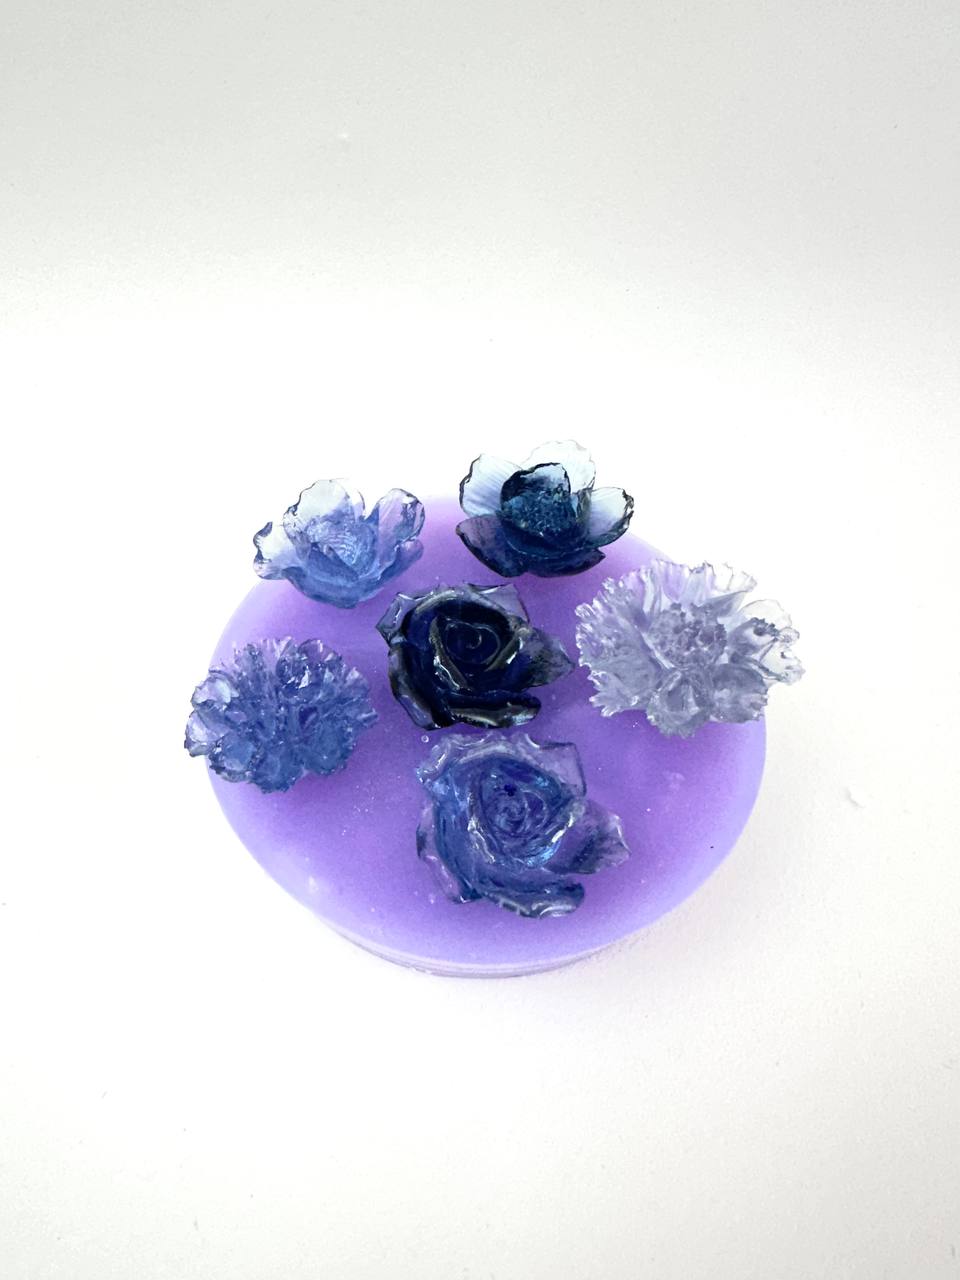 Petite 3D Floral Silicone Resin Molds - 6 Small Flower Designs for Crafting Epoxy Resin